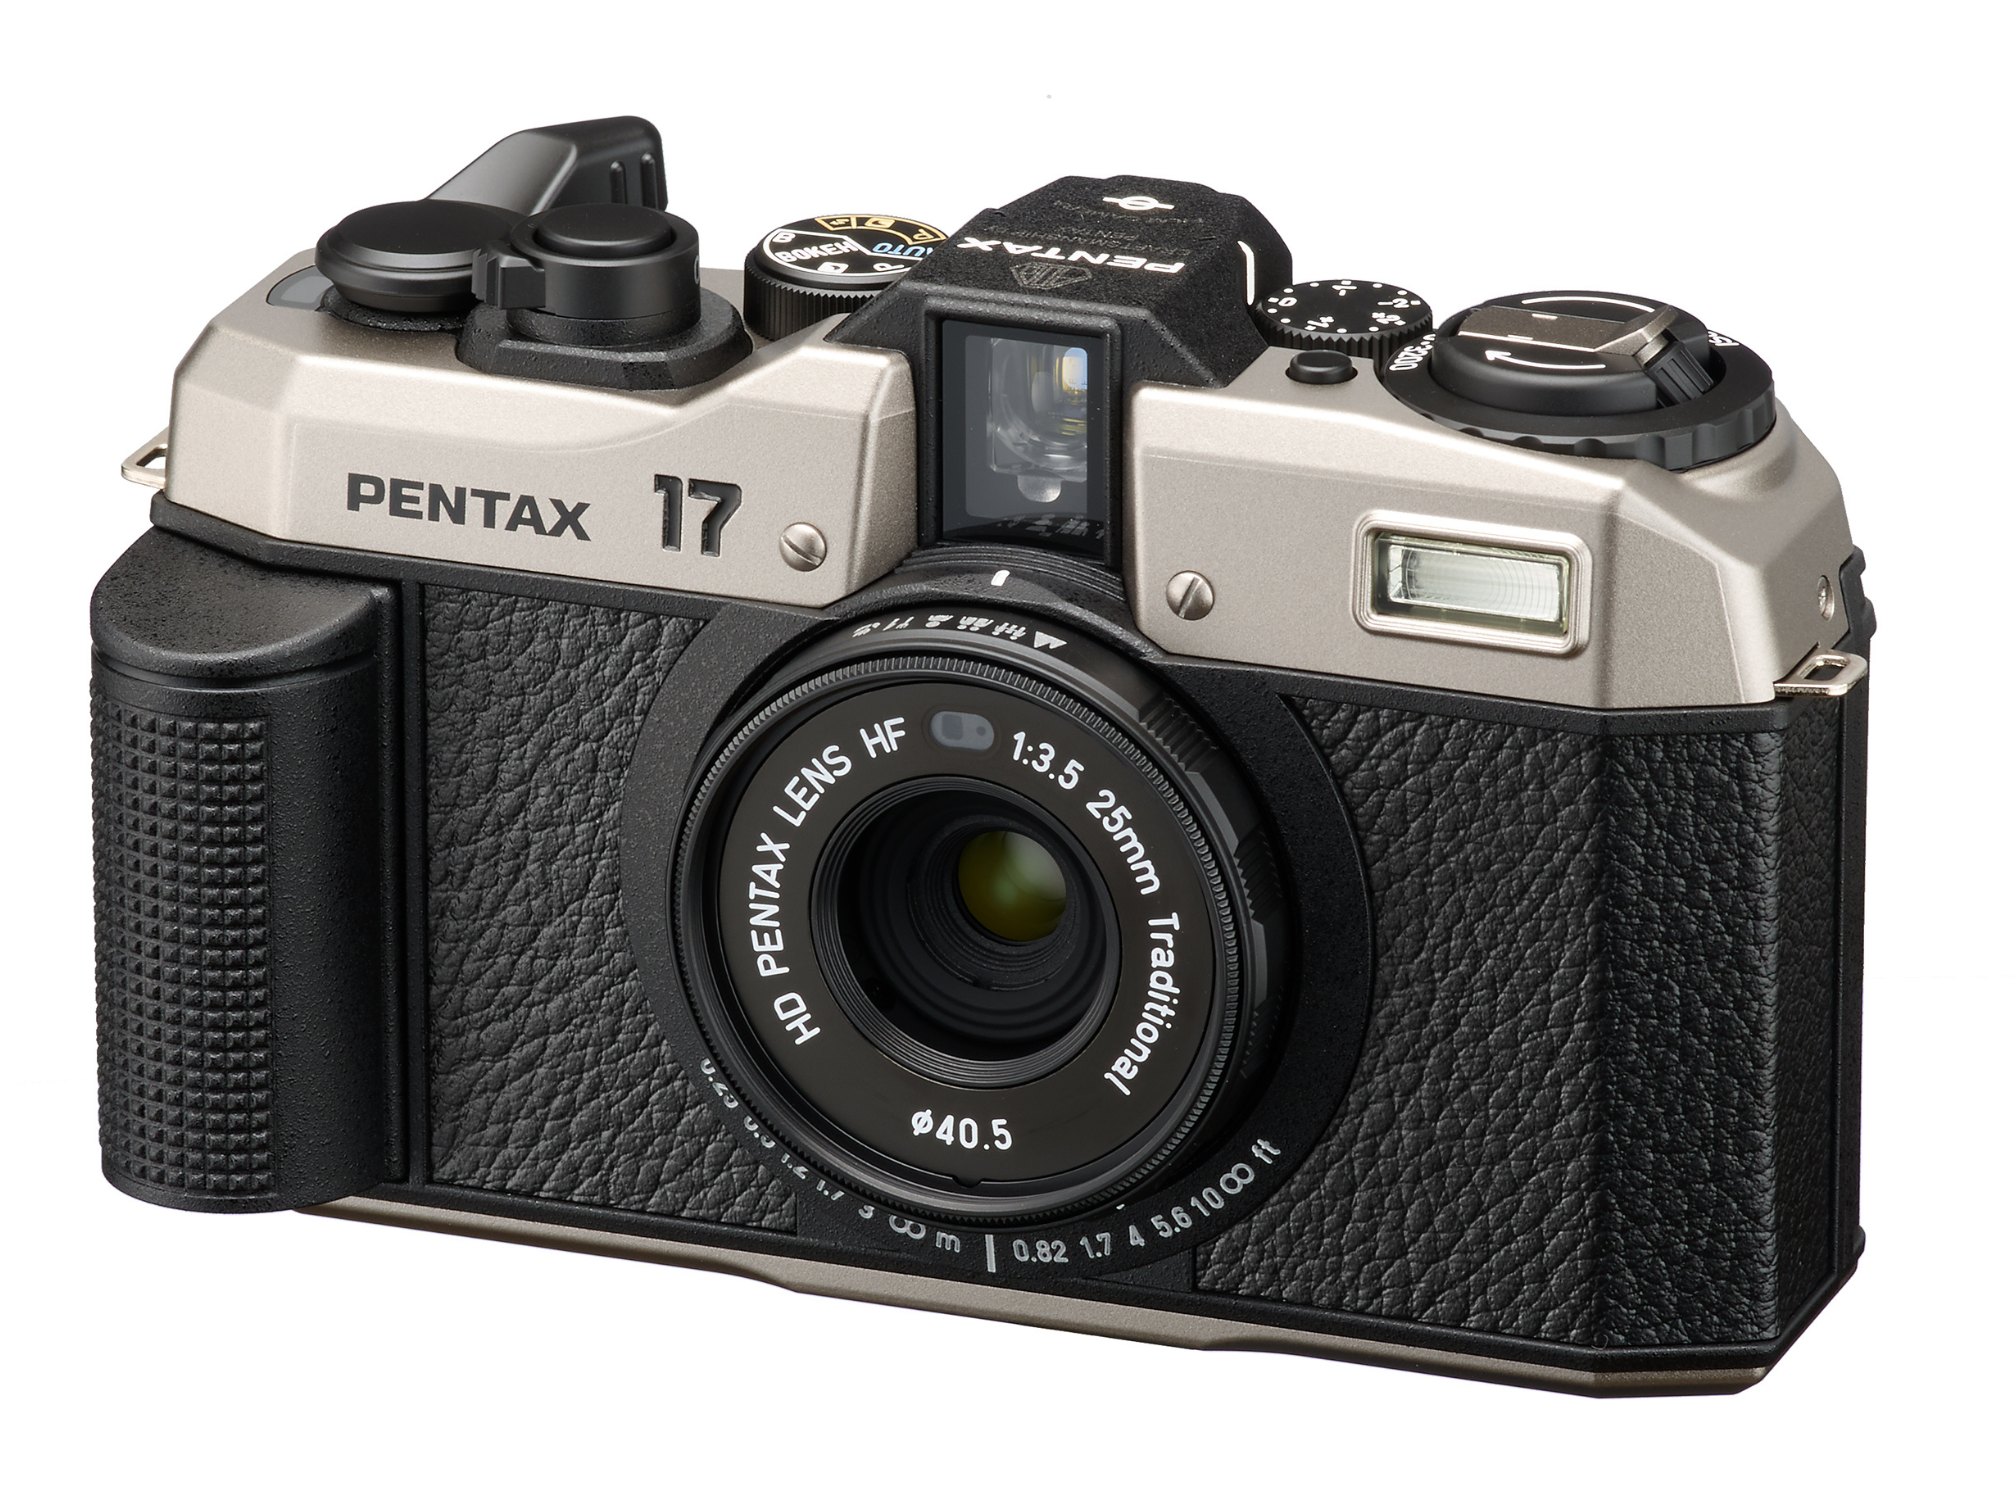 Pentax 17 Film Camera - Product Photo - view from an angle